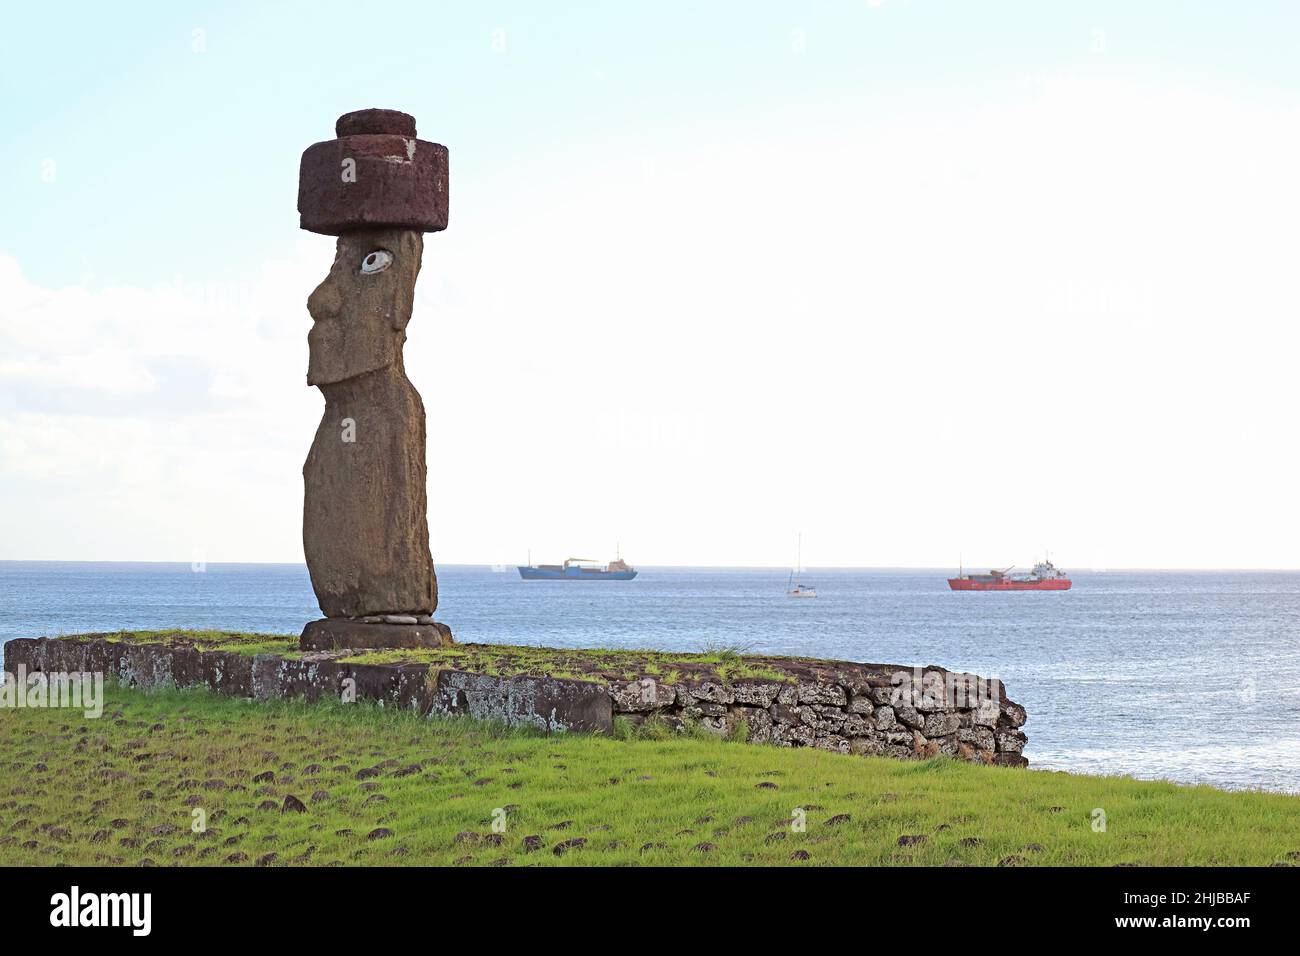 The Moai with Pukao (Hat) of Ahu Ko Te Riku Ceremonial Platform, with Pacific Ocean in the Backdrop,, Easter Island, Chile Stock Photo